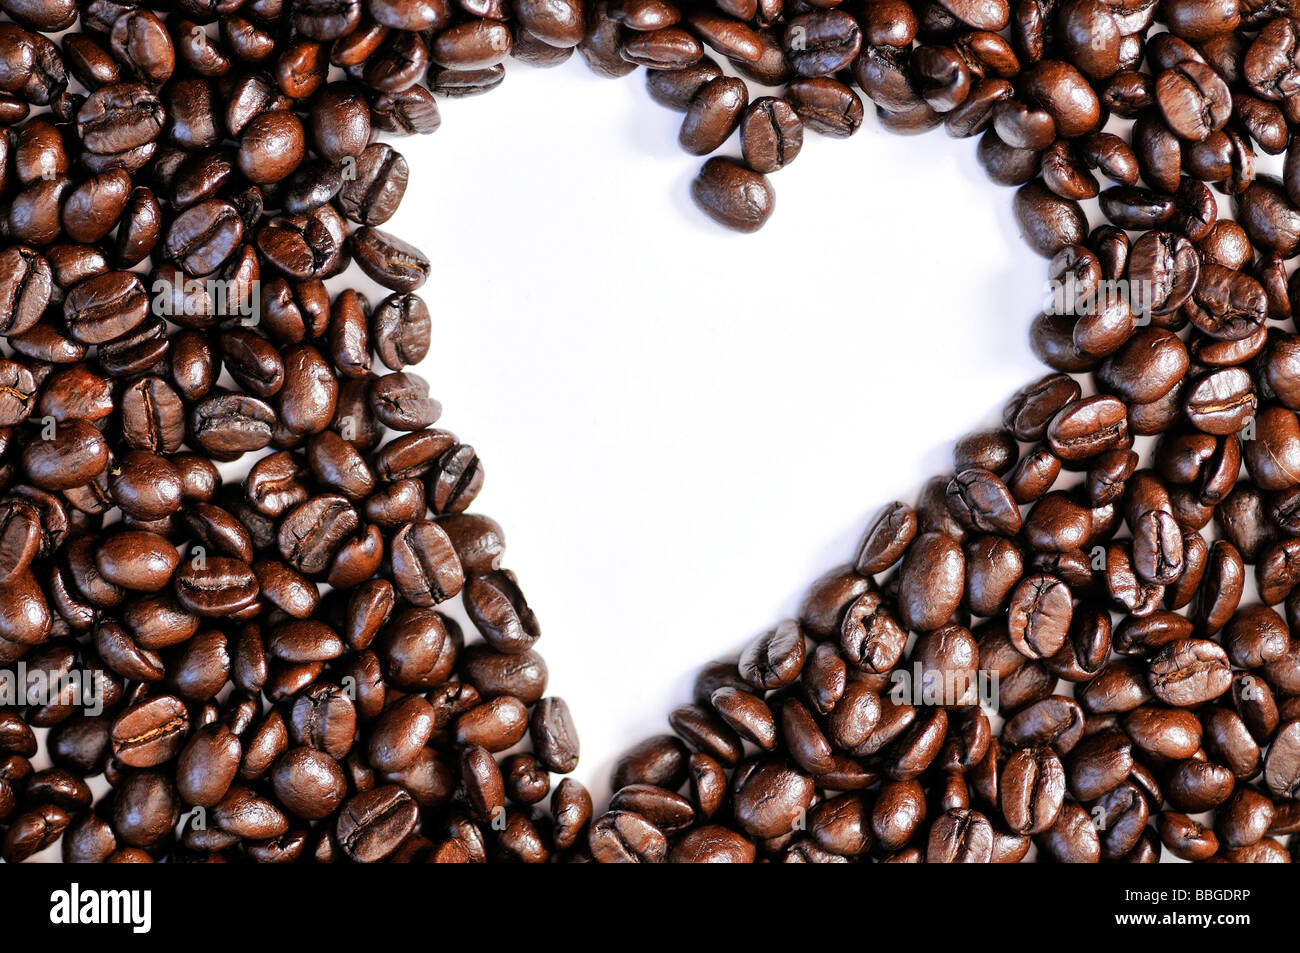 Coffee beans forming a heart shape Stock Photo